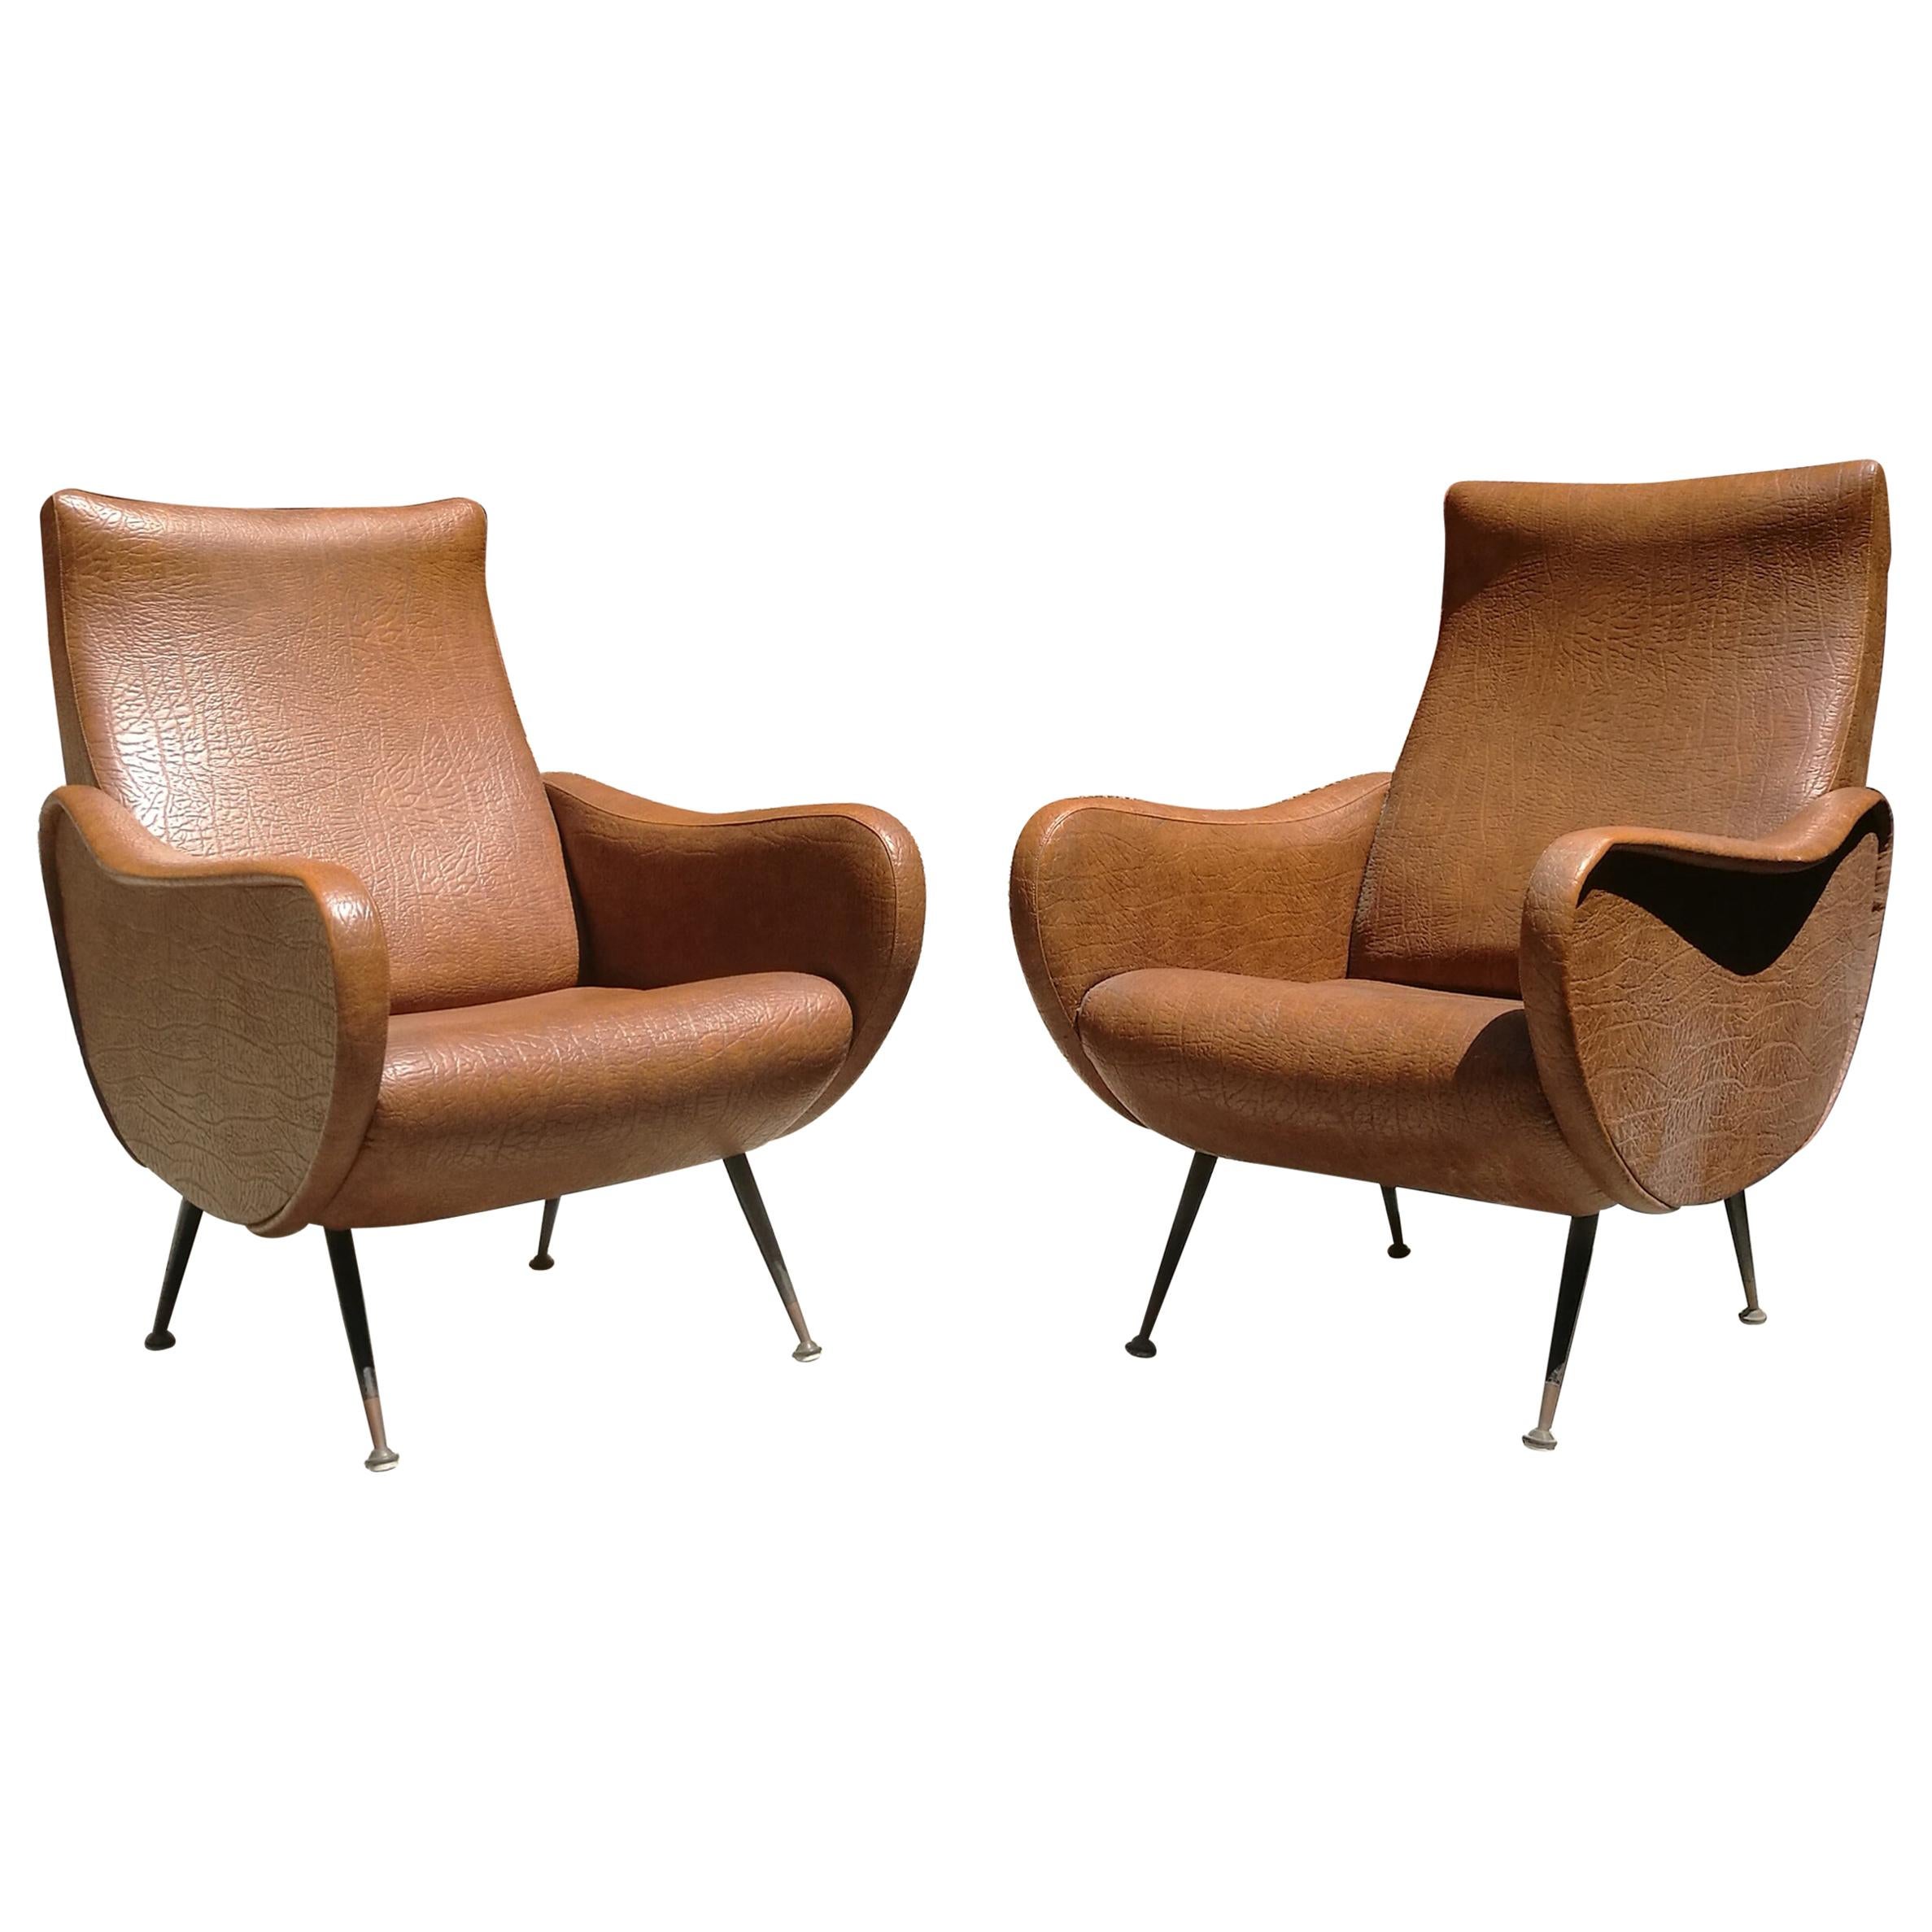 Italian Leatherette Armchairs from 1950s in the Style of Lady Armchair by Zanuso